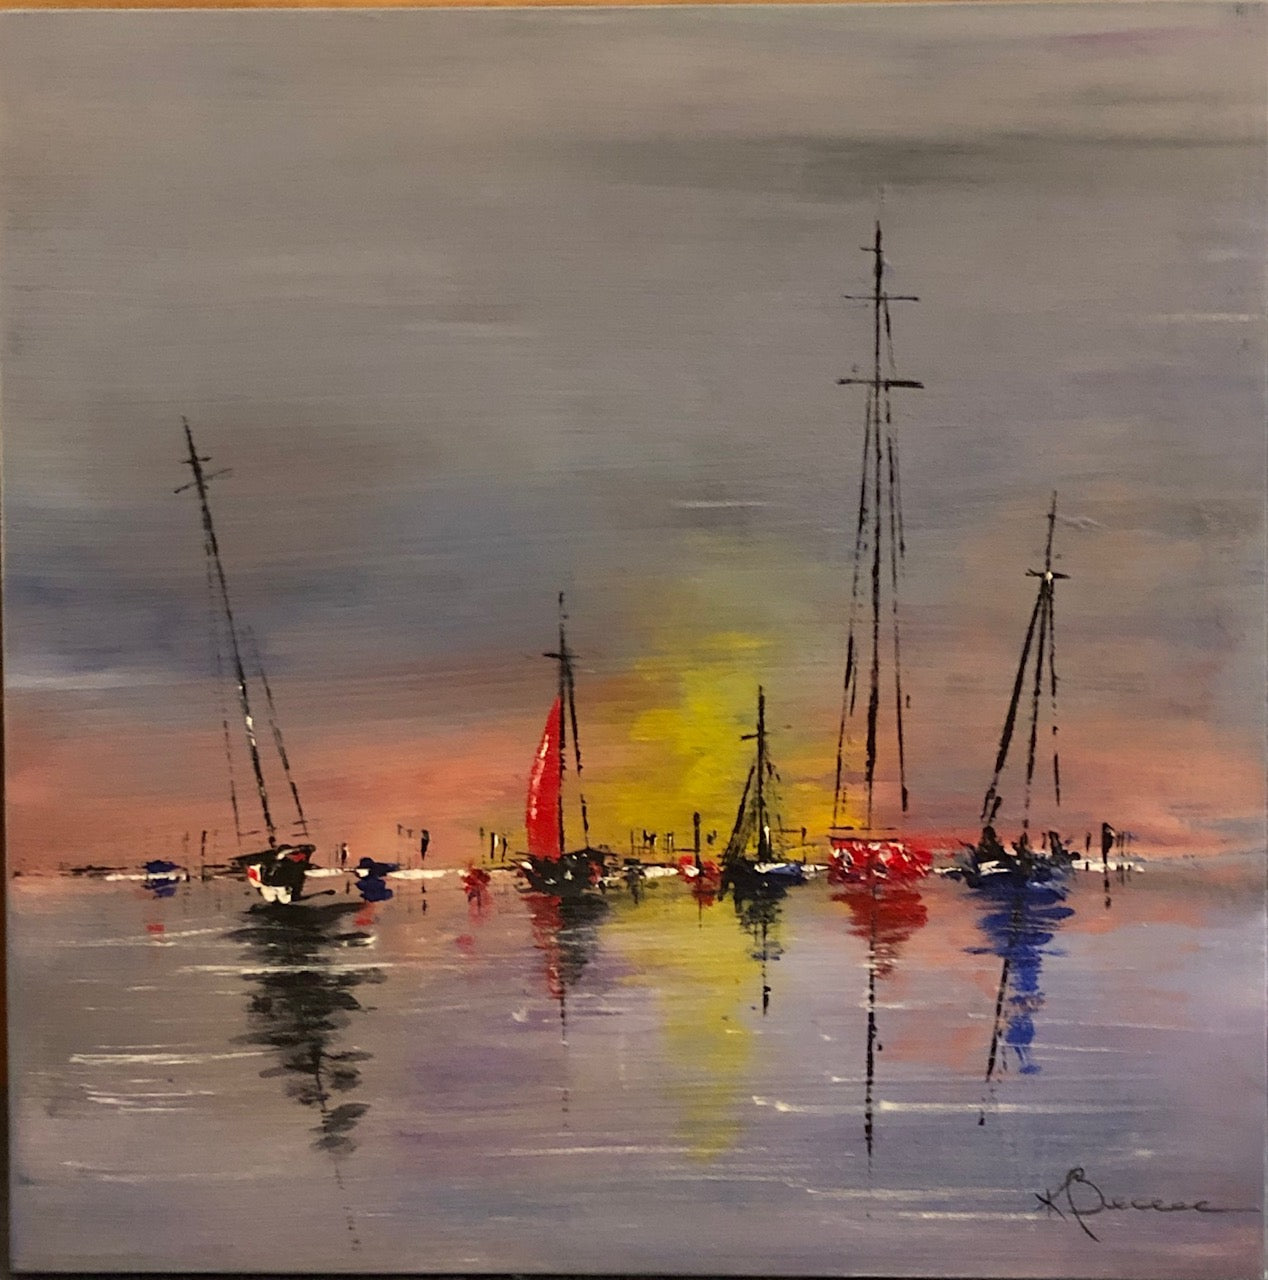 On the Bay #2  Gallery Wrapped Canvas Print  8X8   by Kip Bedell